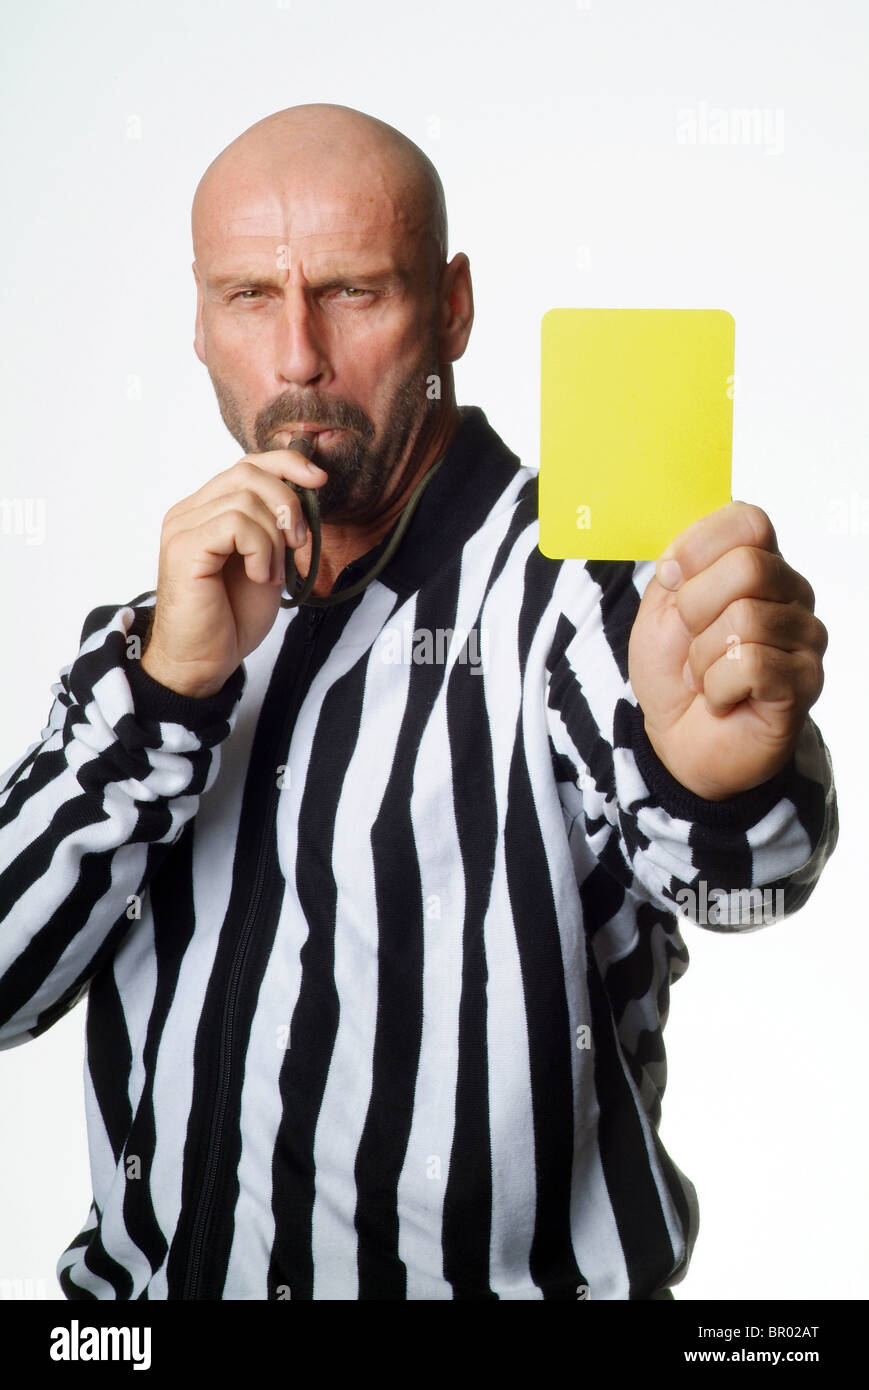 A soccer referee showing a yellow card Stock Photo